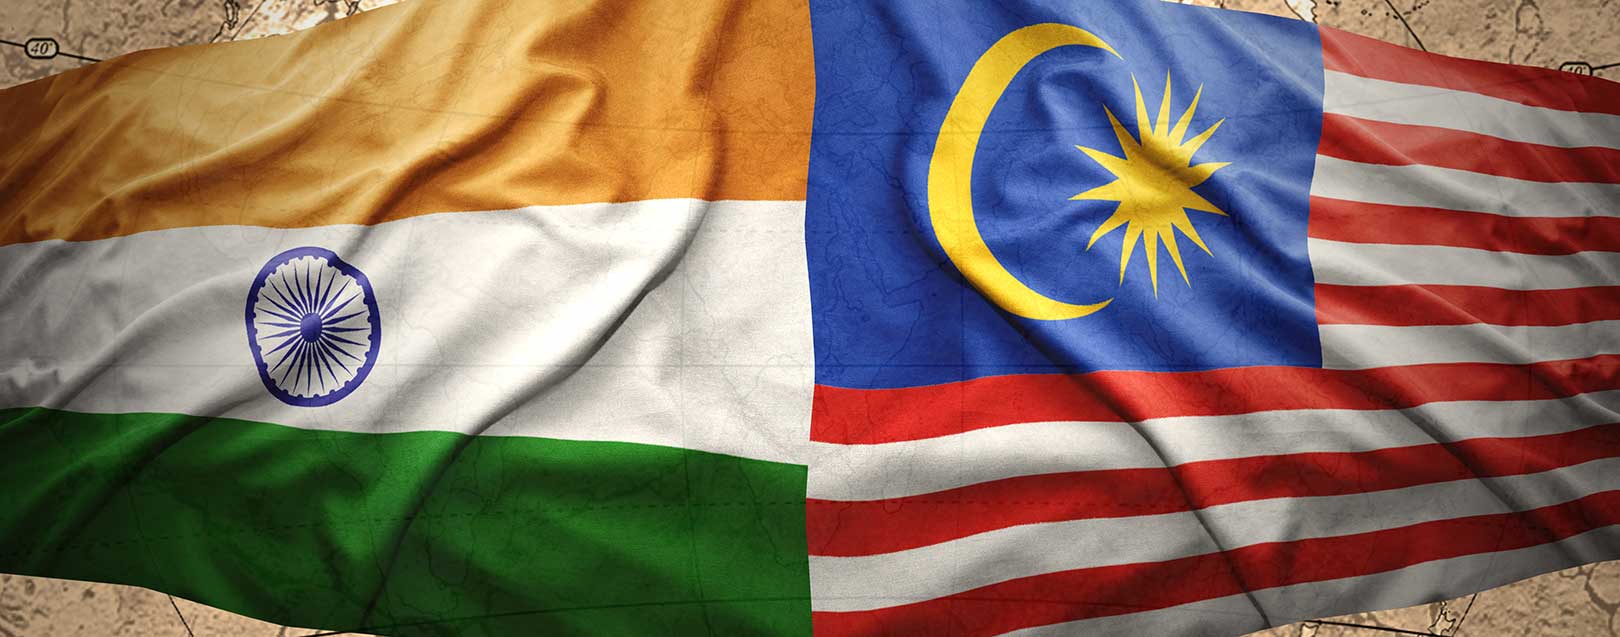 Malaysia vows to boost trade ties with India